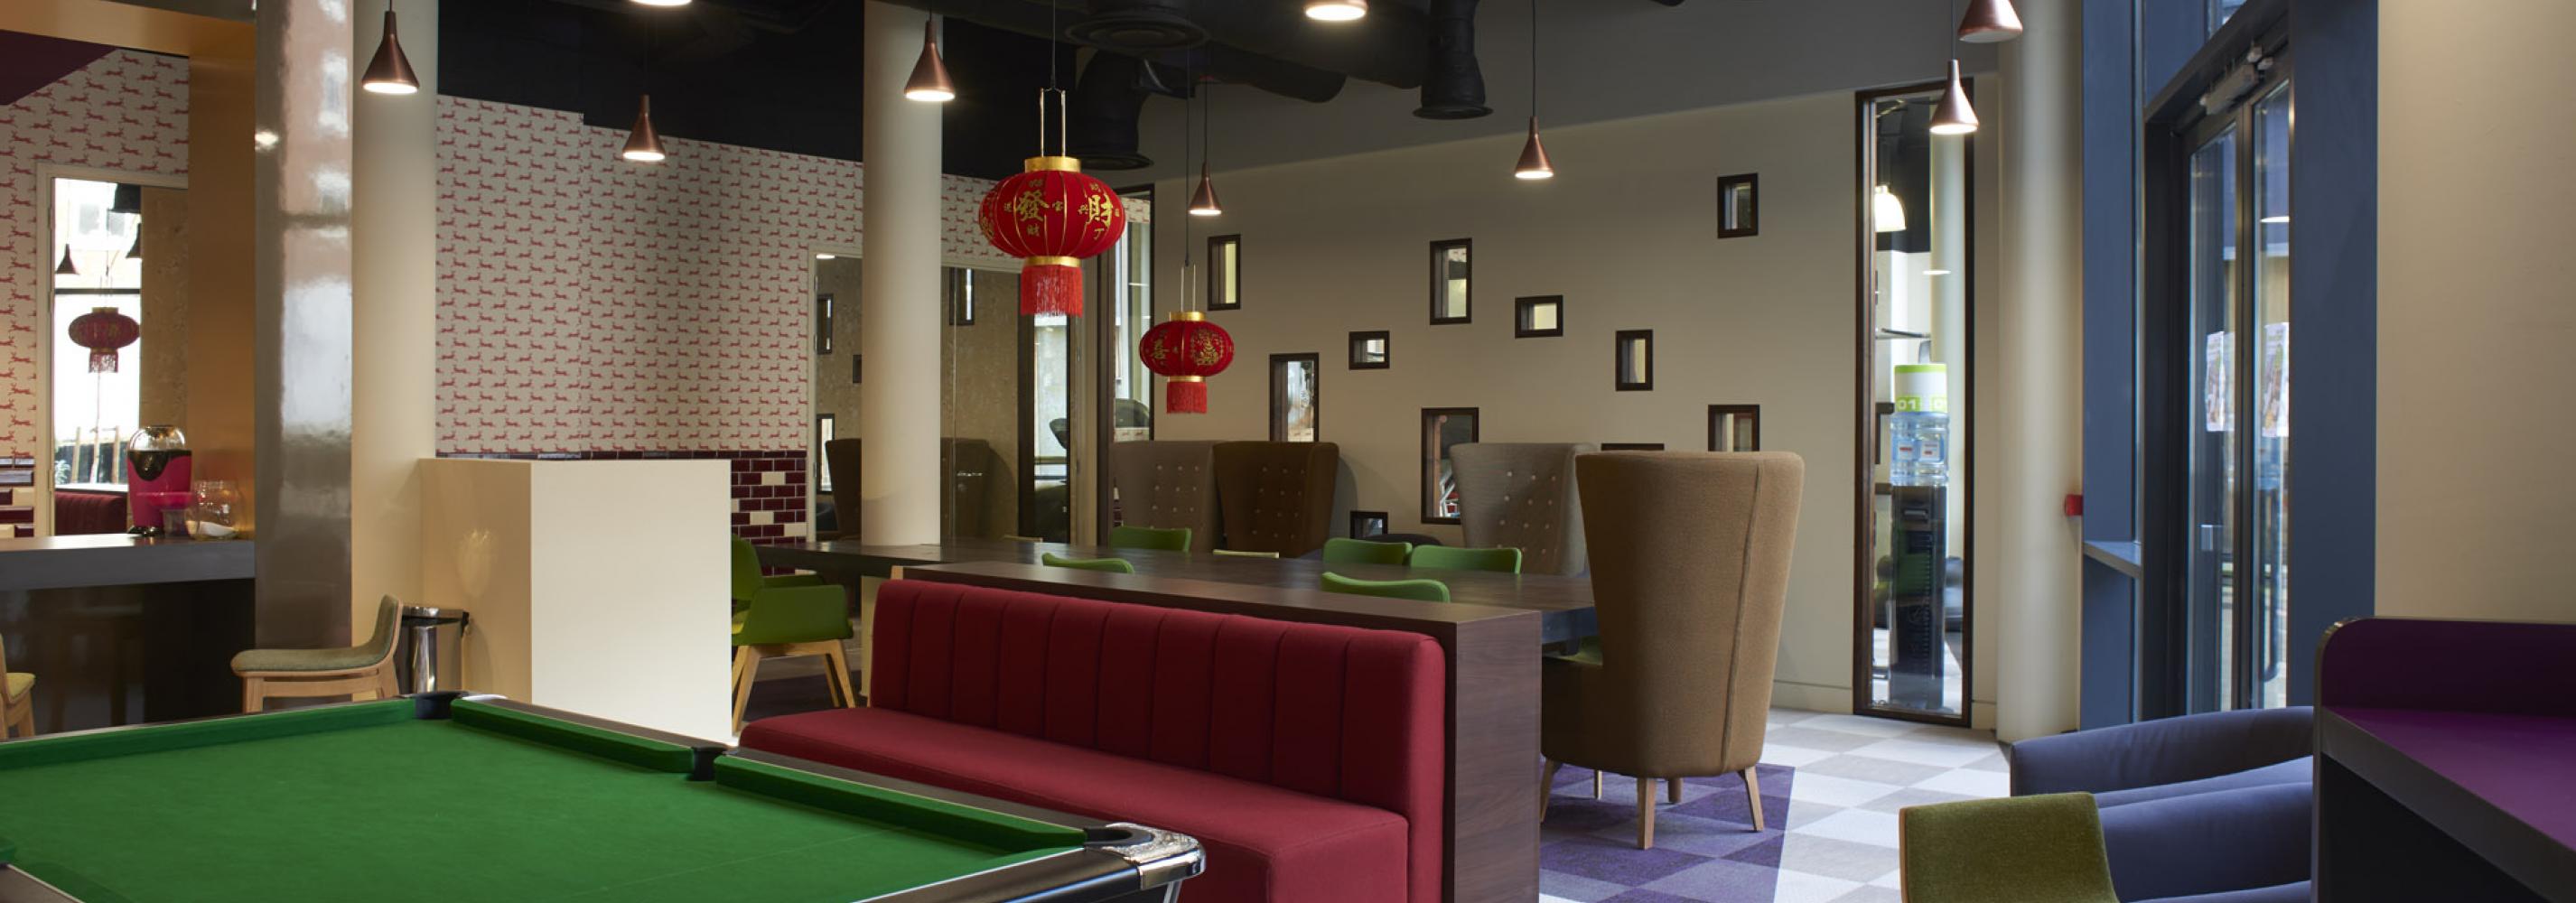 Communal area with seating and pool table